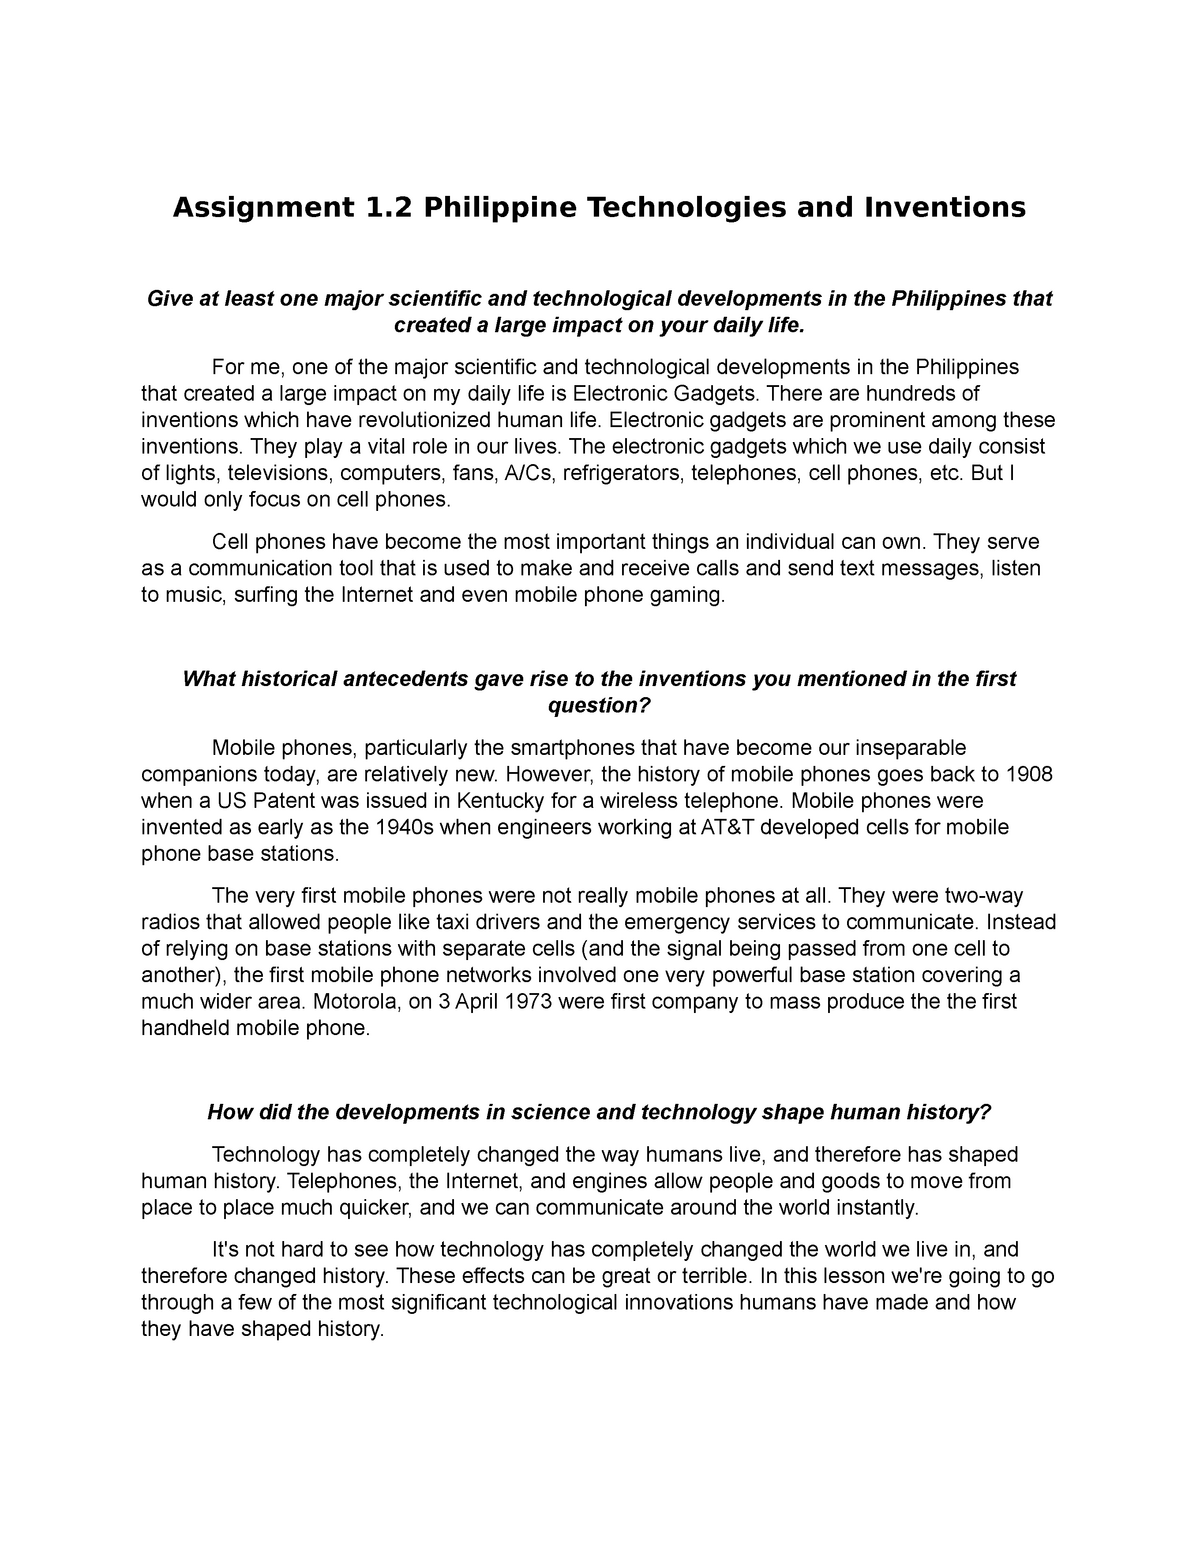 essay about technological innovation in the philippines